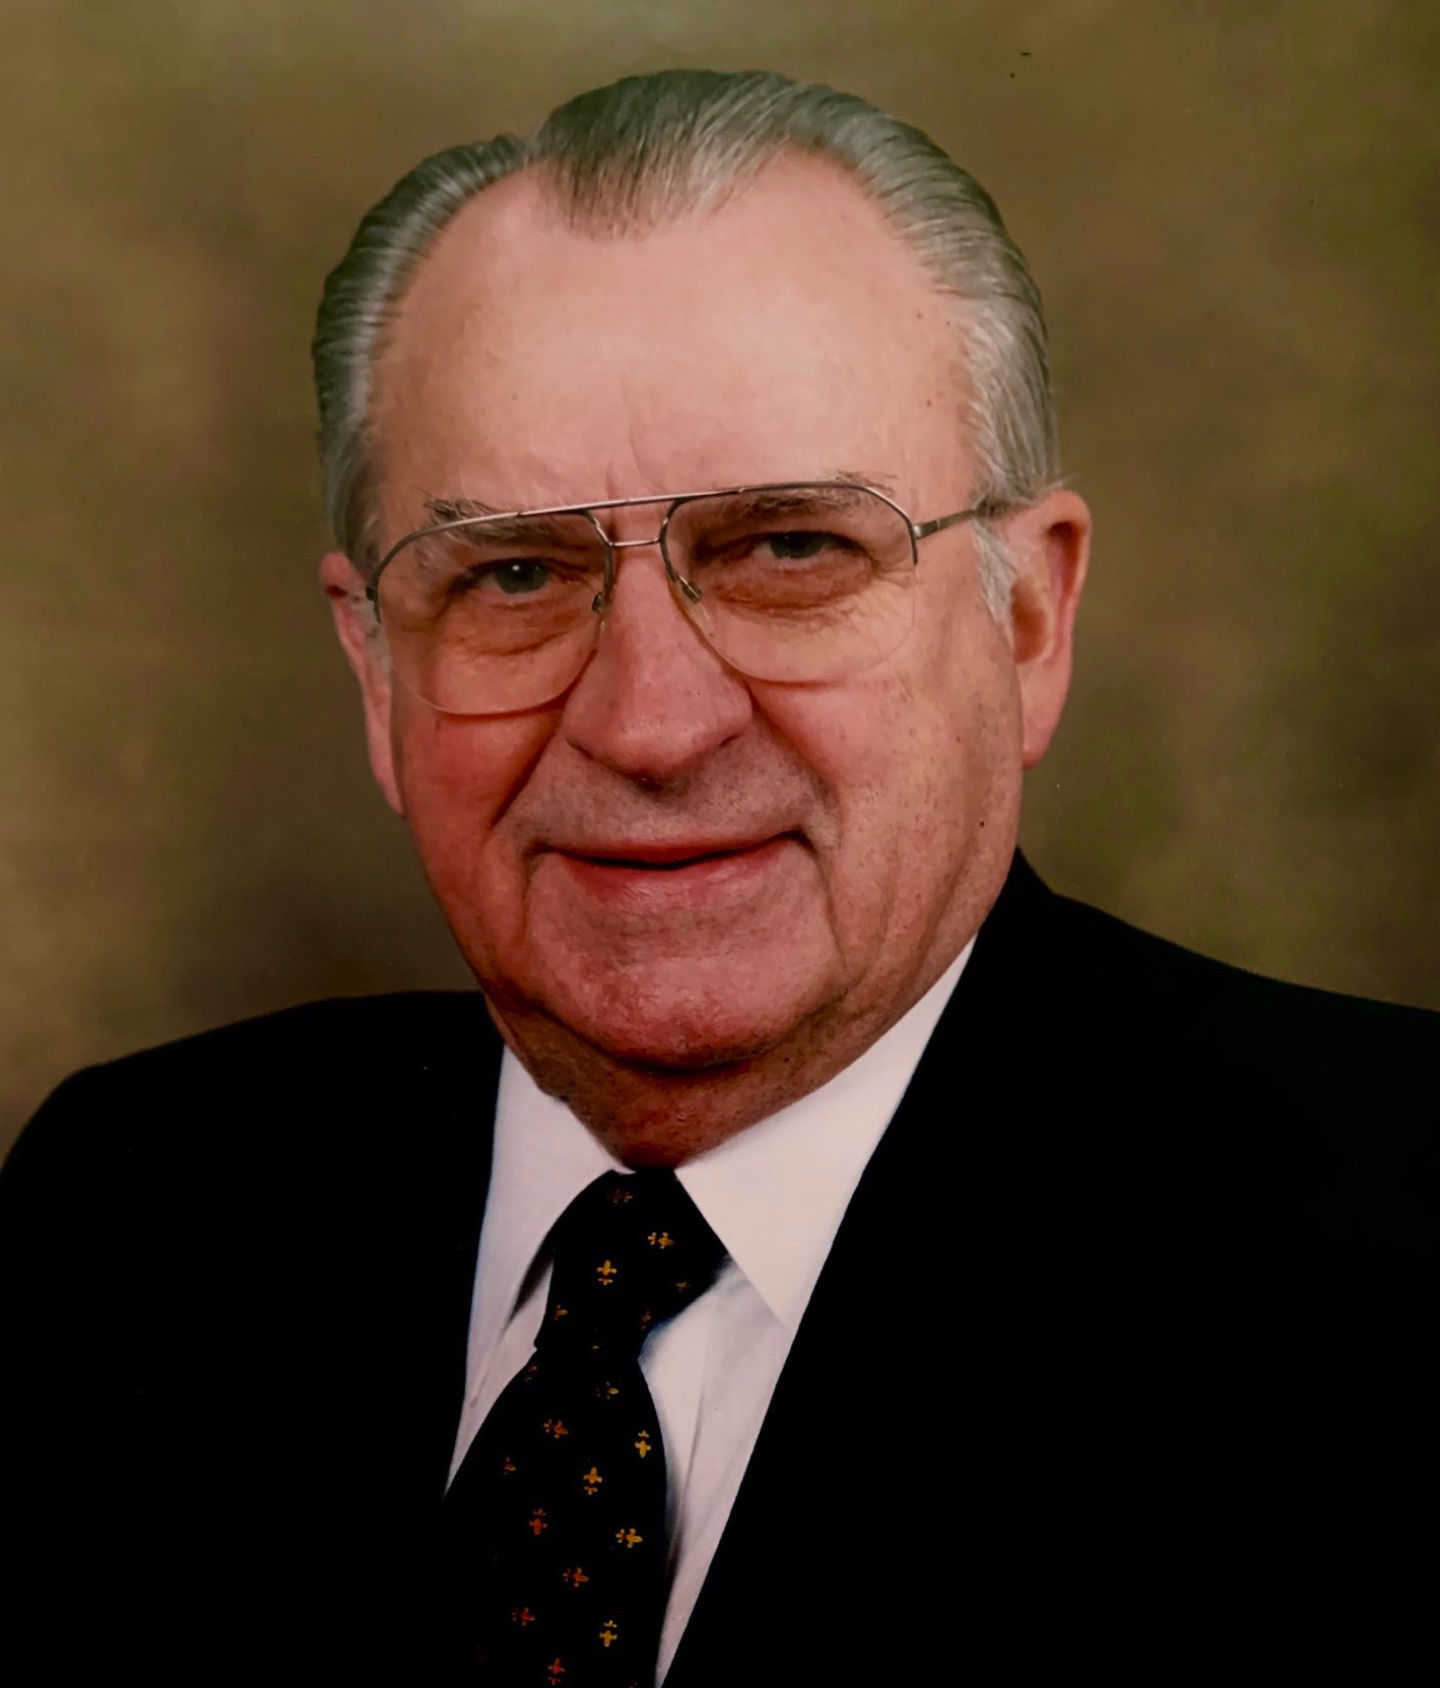 Portrait of Thomas M. Reavley, wearing glasses and a suit with a black jacket and black and gold tie.